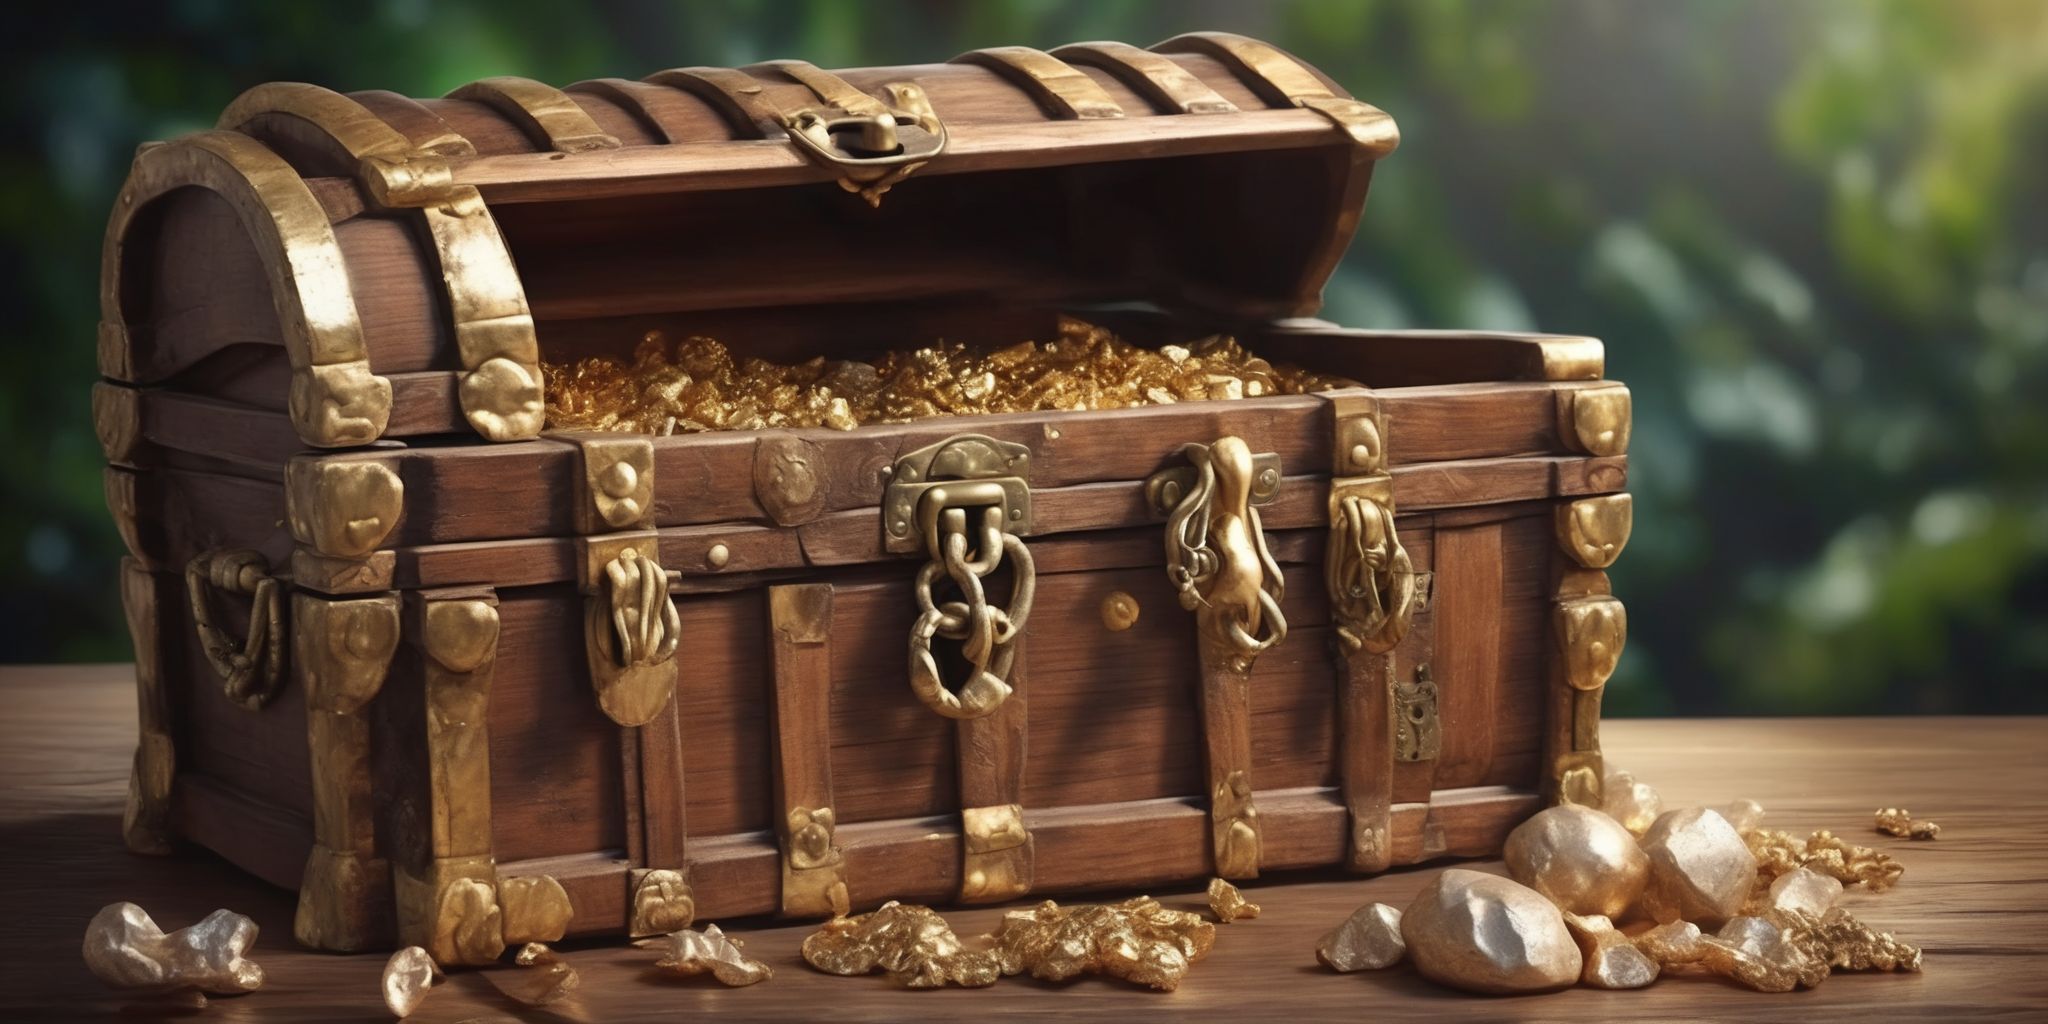 Treasure chest  in realistic, photographic style